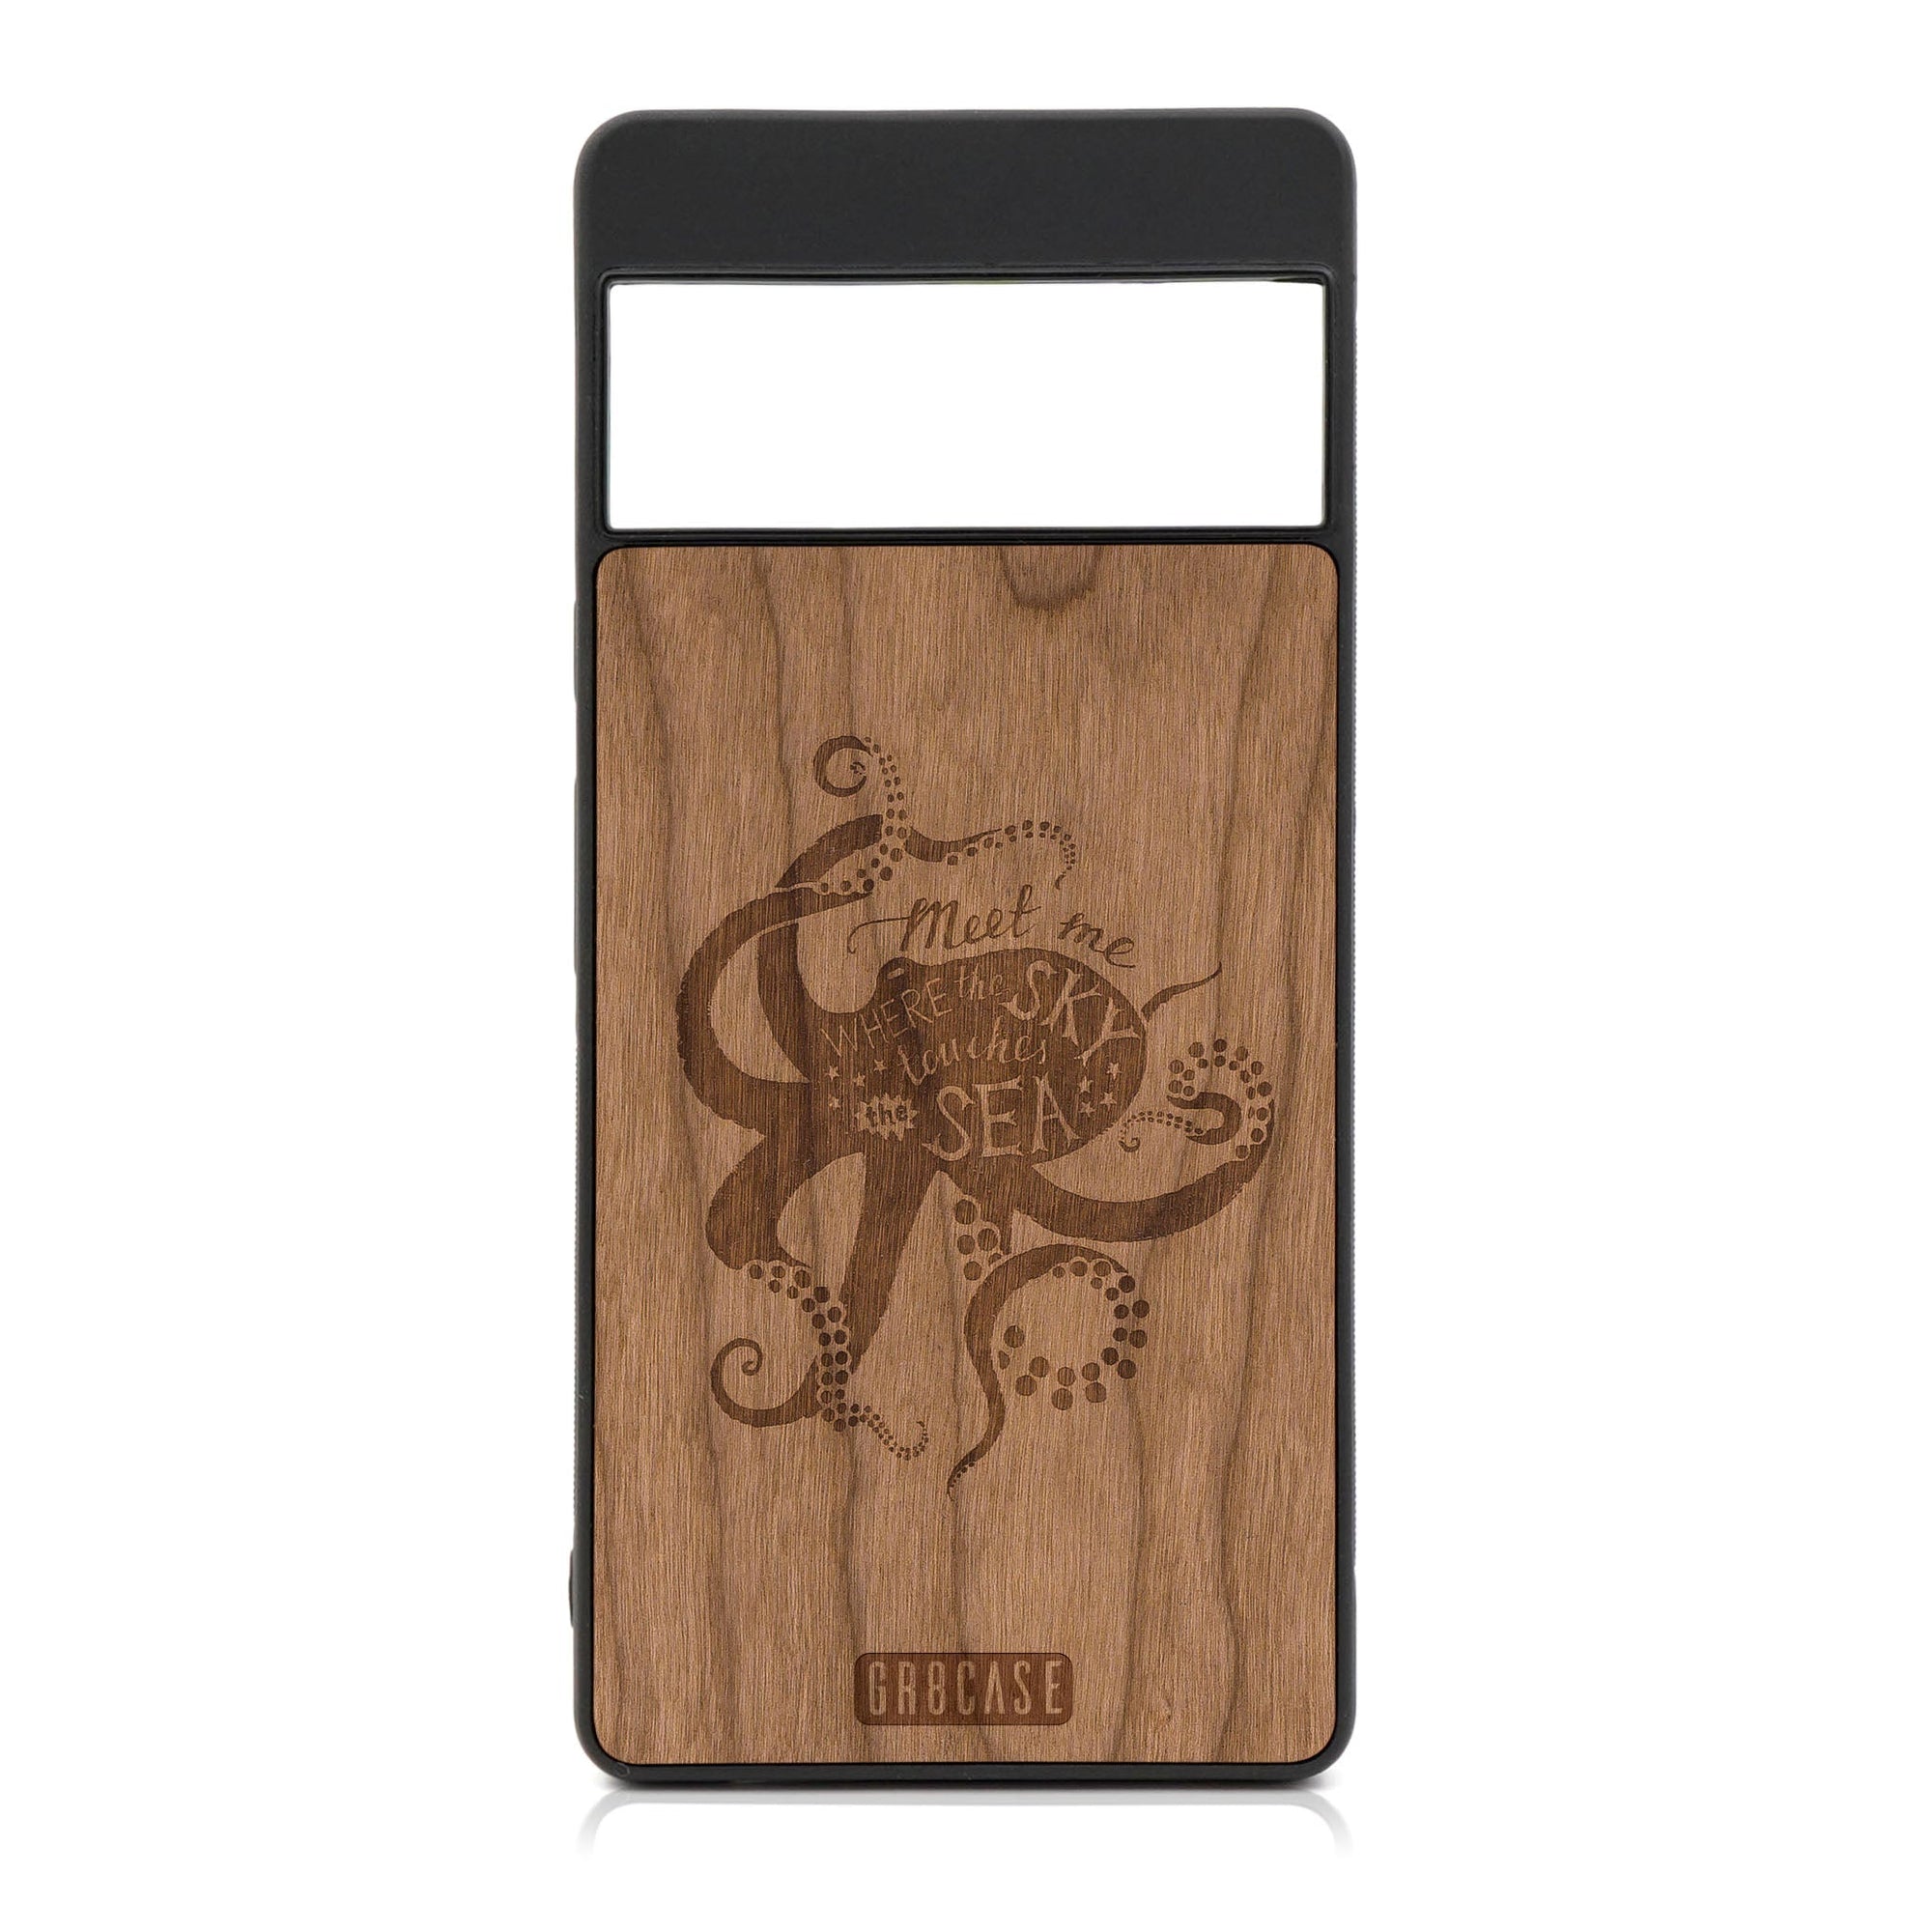 Meet Me Where The Sky Touches The Sea (Octopus) Design Wood Case For Google Pixel 6A